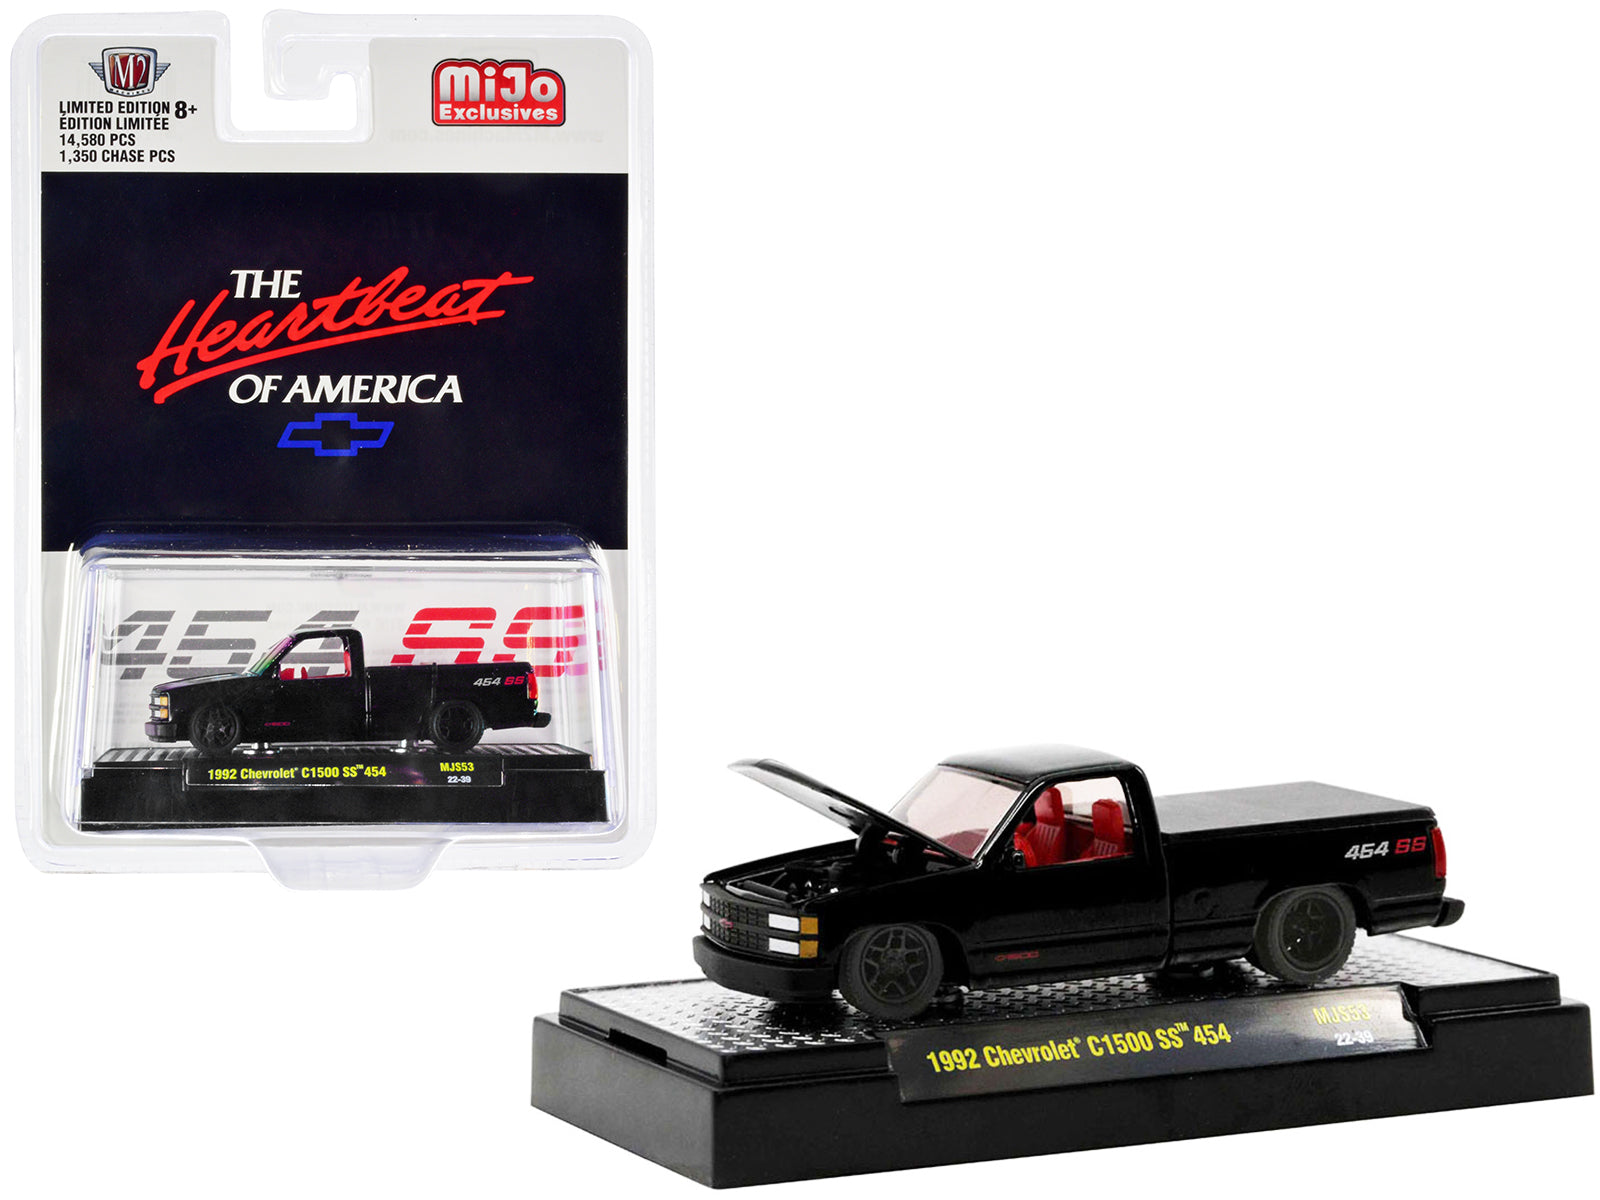 1992 Chevrolet C1500 SS 454 Pickup Truck Black with Red Interior "The Heartbeat of America" Limited Edition to 14580 pieces Worldwide 1/64 Diecast Model Car by M2 Machine